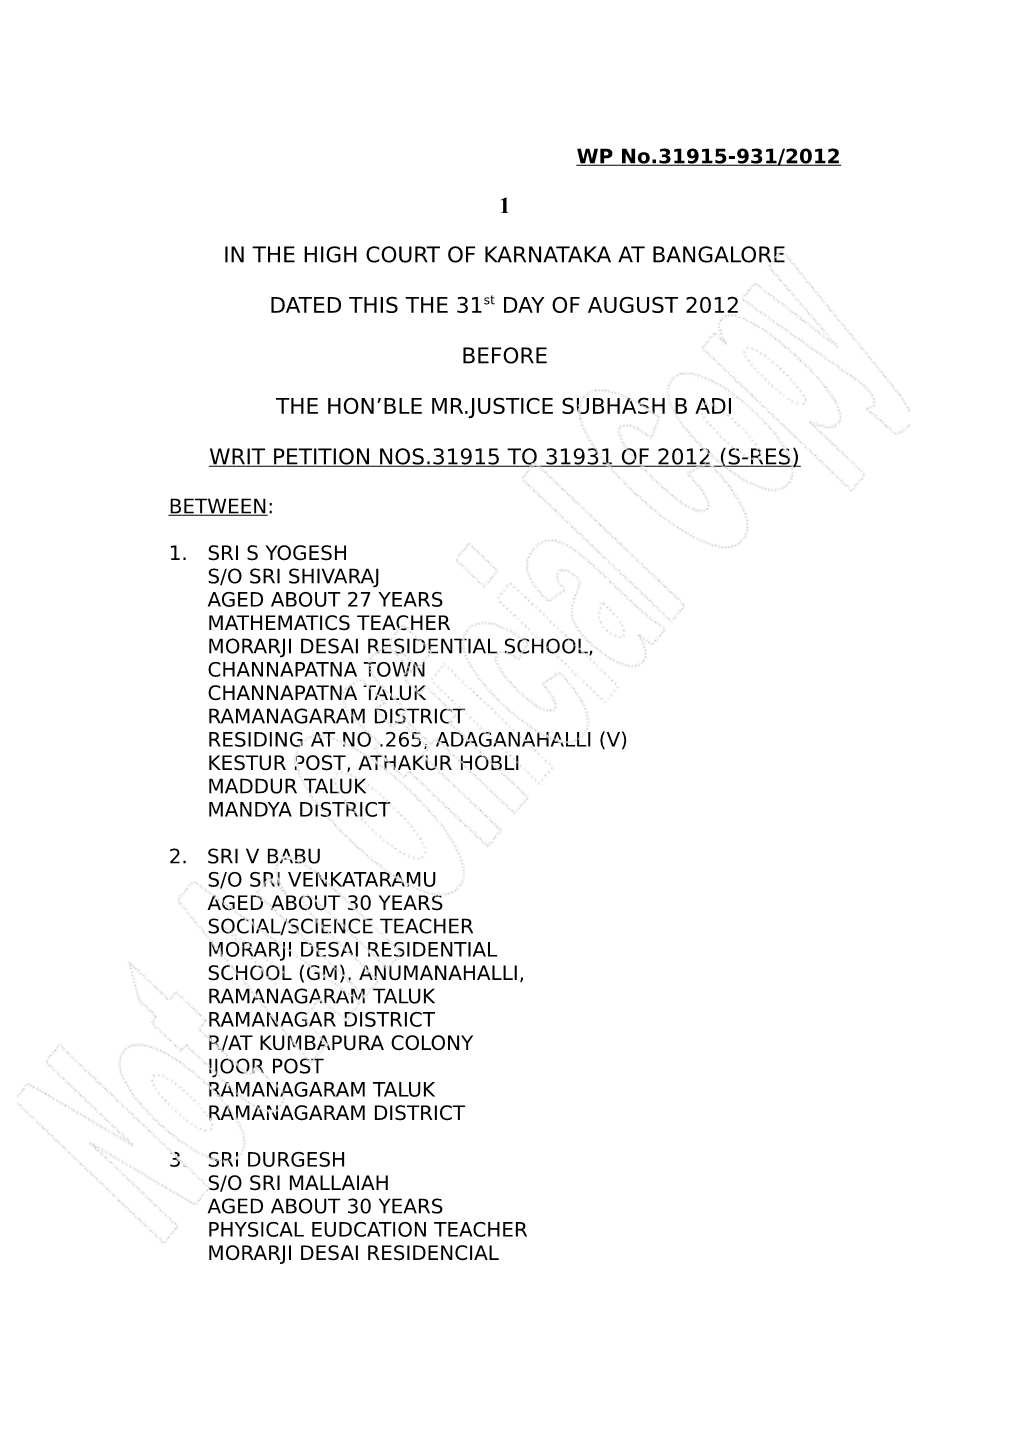 IN the HIGH COURT of KARNATAKA at BANGALORE DATED THIS the 31St DAY of AUGUST 2012 BEFORE the HON'ble MR.JUSTICE SUBHASH B